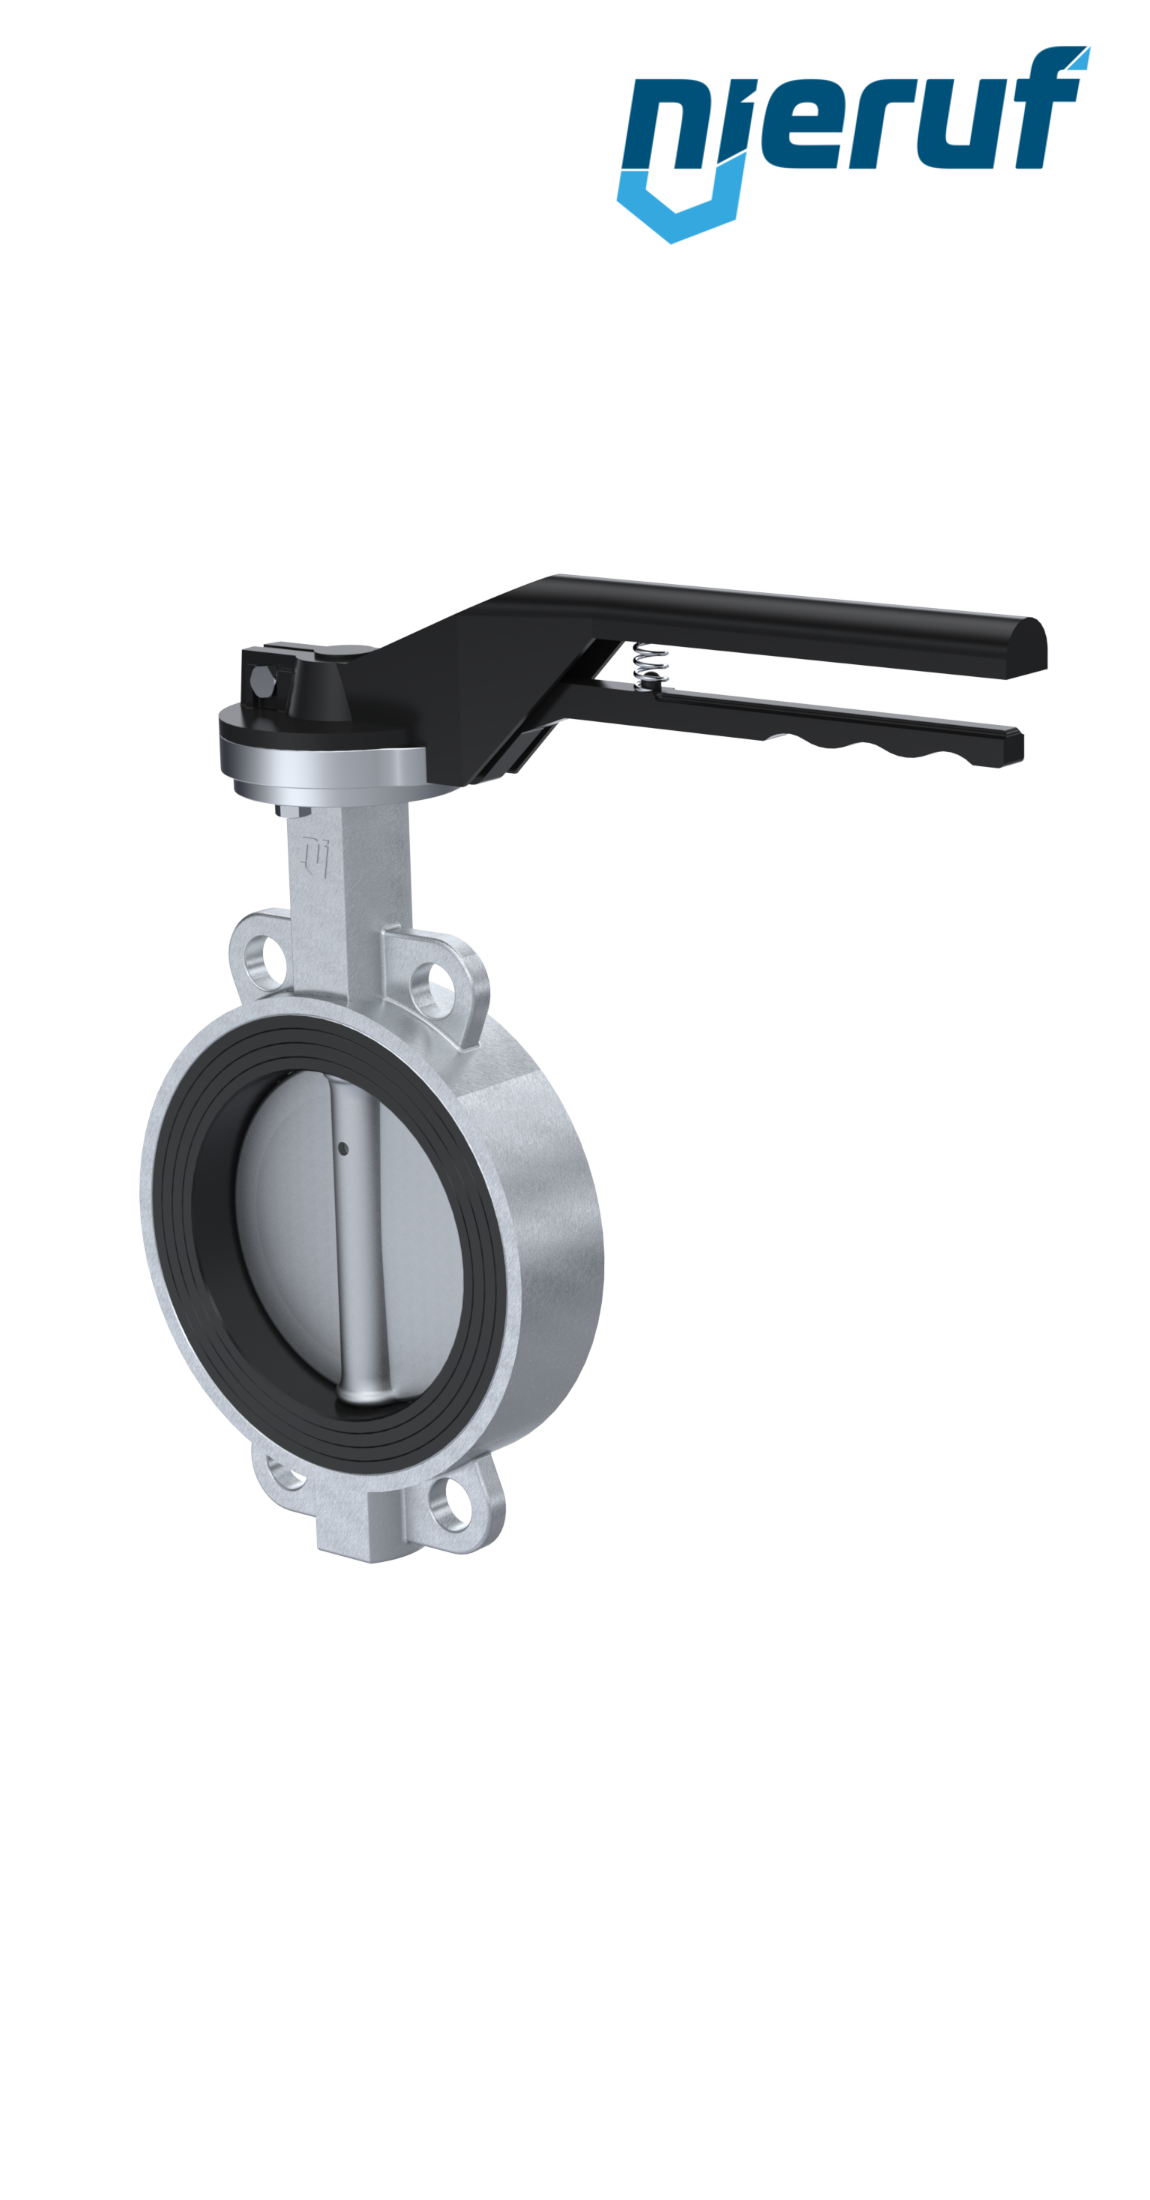 Butterfly-valve-stainless-steel DN250 PN16 AK08 EPDM notch lever